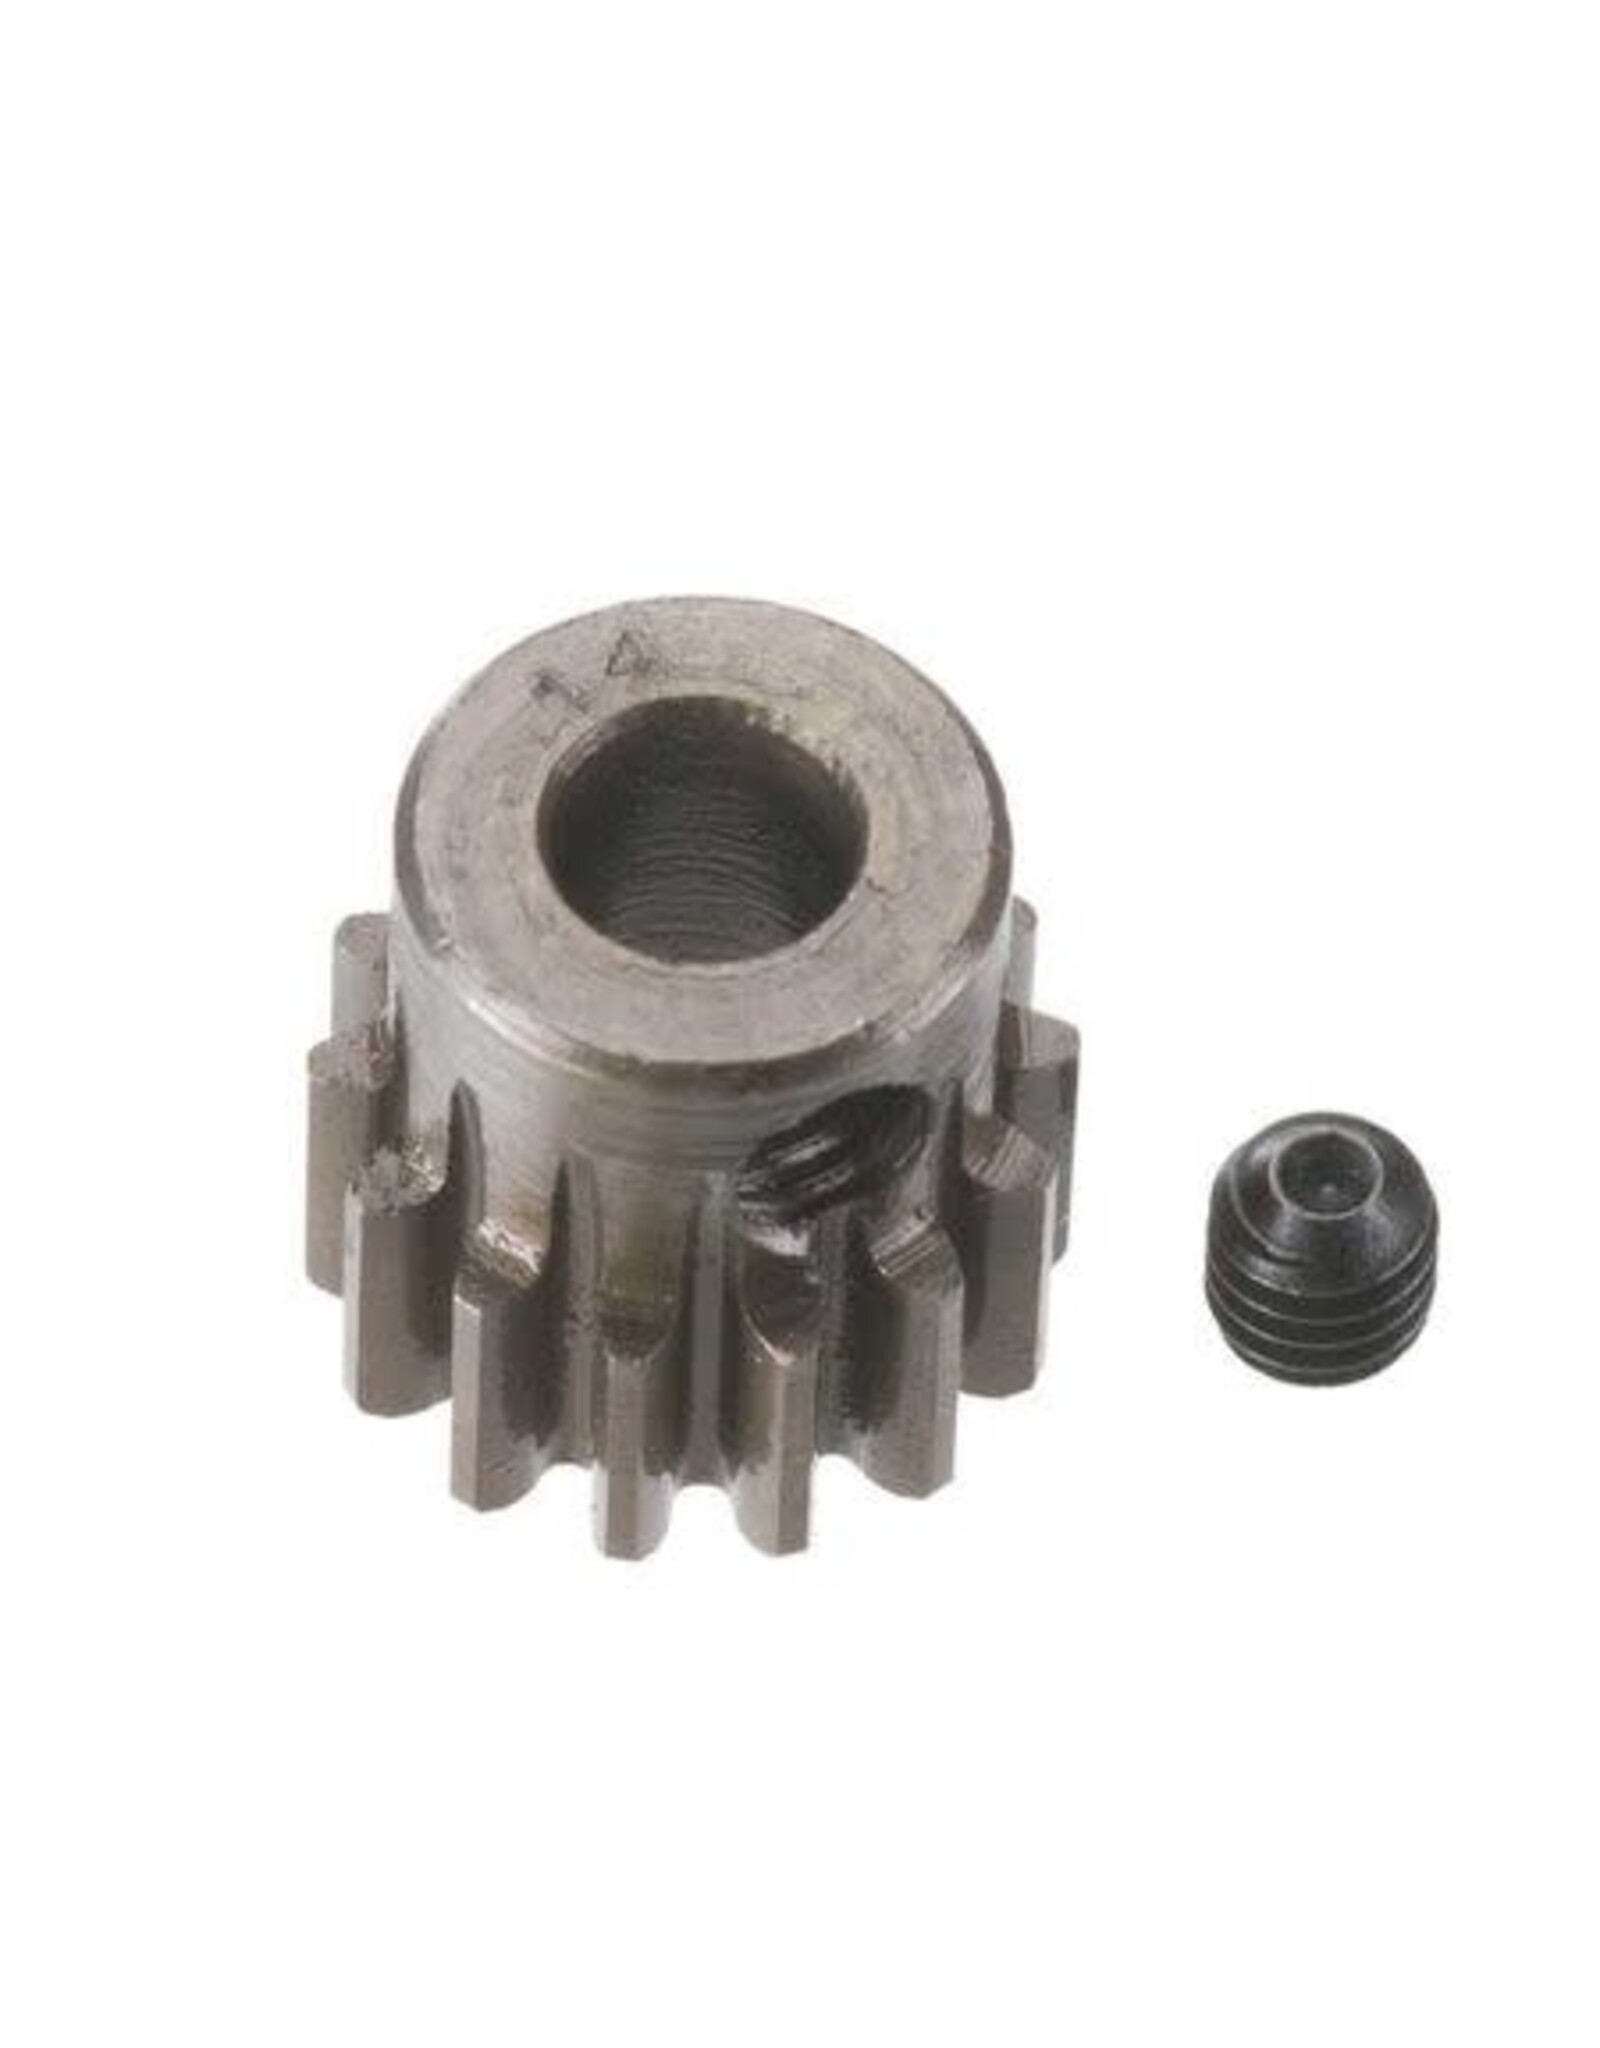 Robinson Racing Products Extra Hard 5mm Bore .8Mod Pinion 14T